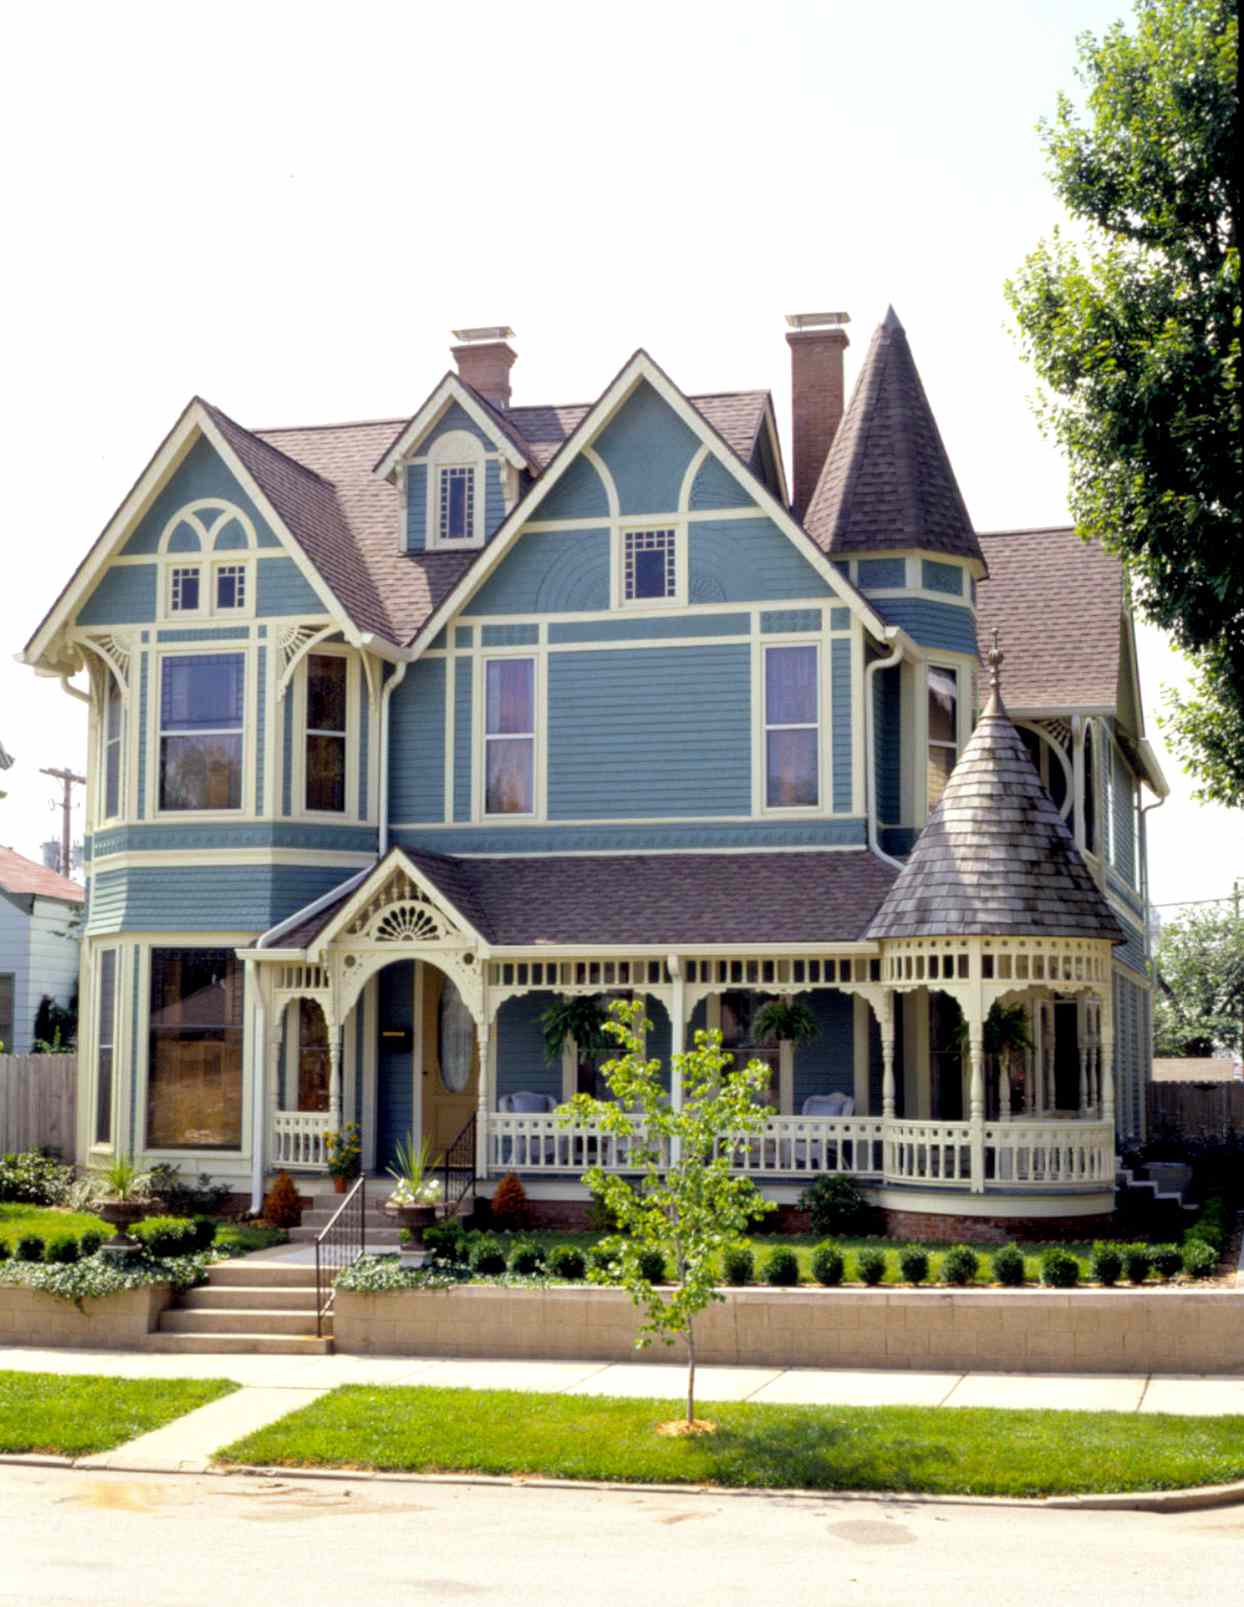 Exterior of blue and white Victorian style house